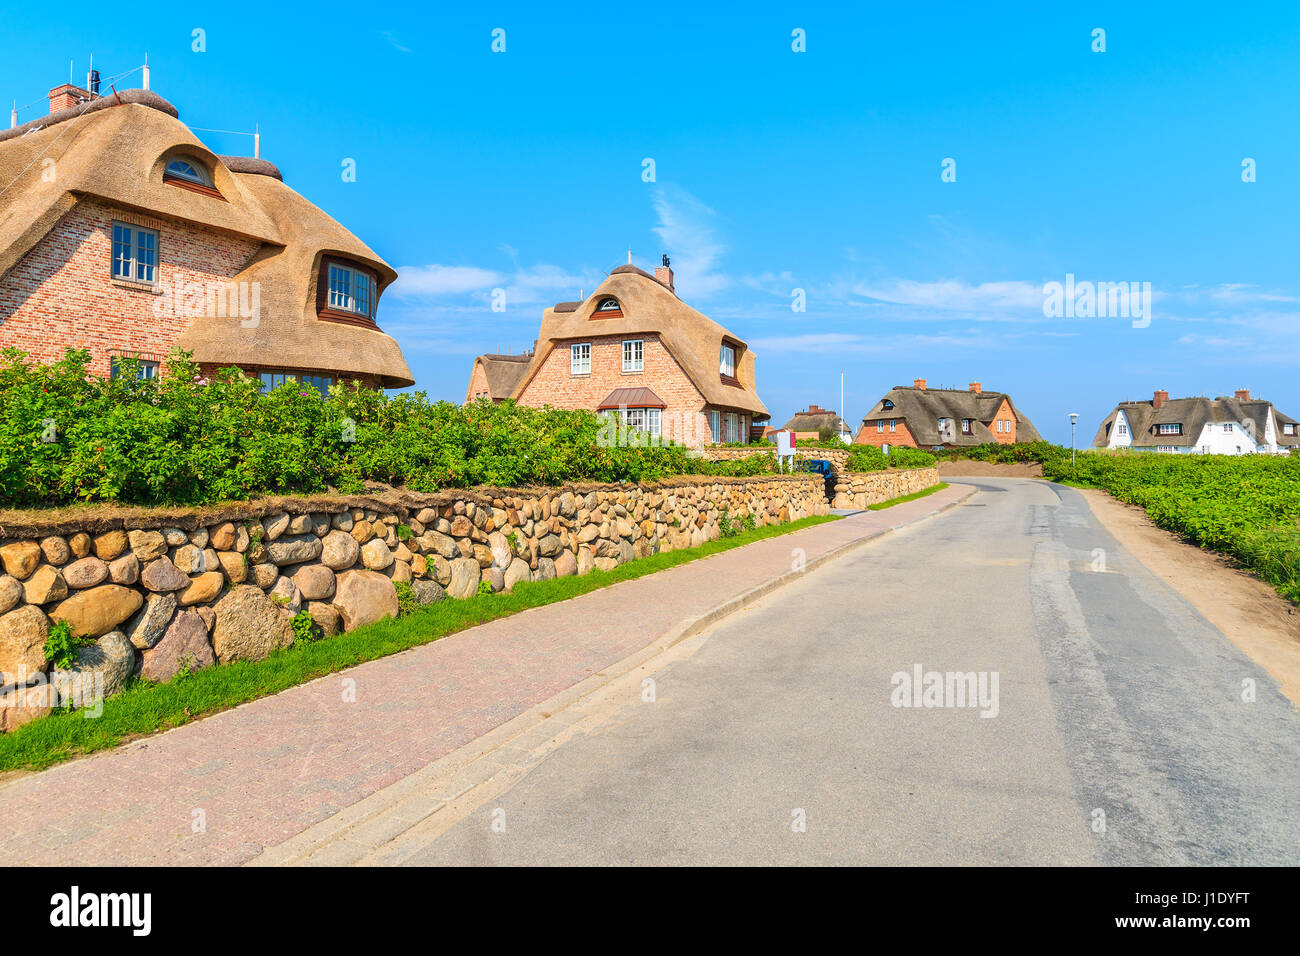 Typical Frisian red brick houses with straw roofs in Rantum village on southern coast of Sylt island, Germany Stock Photo